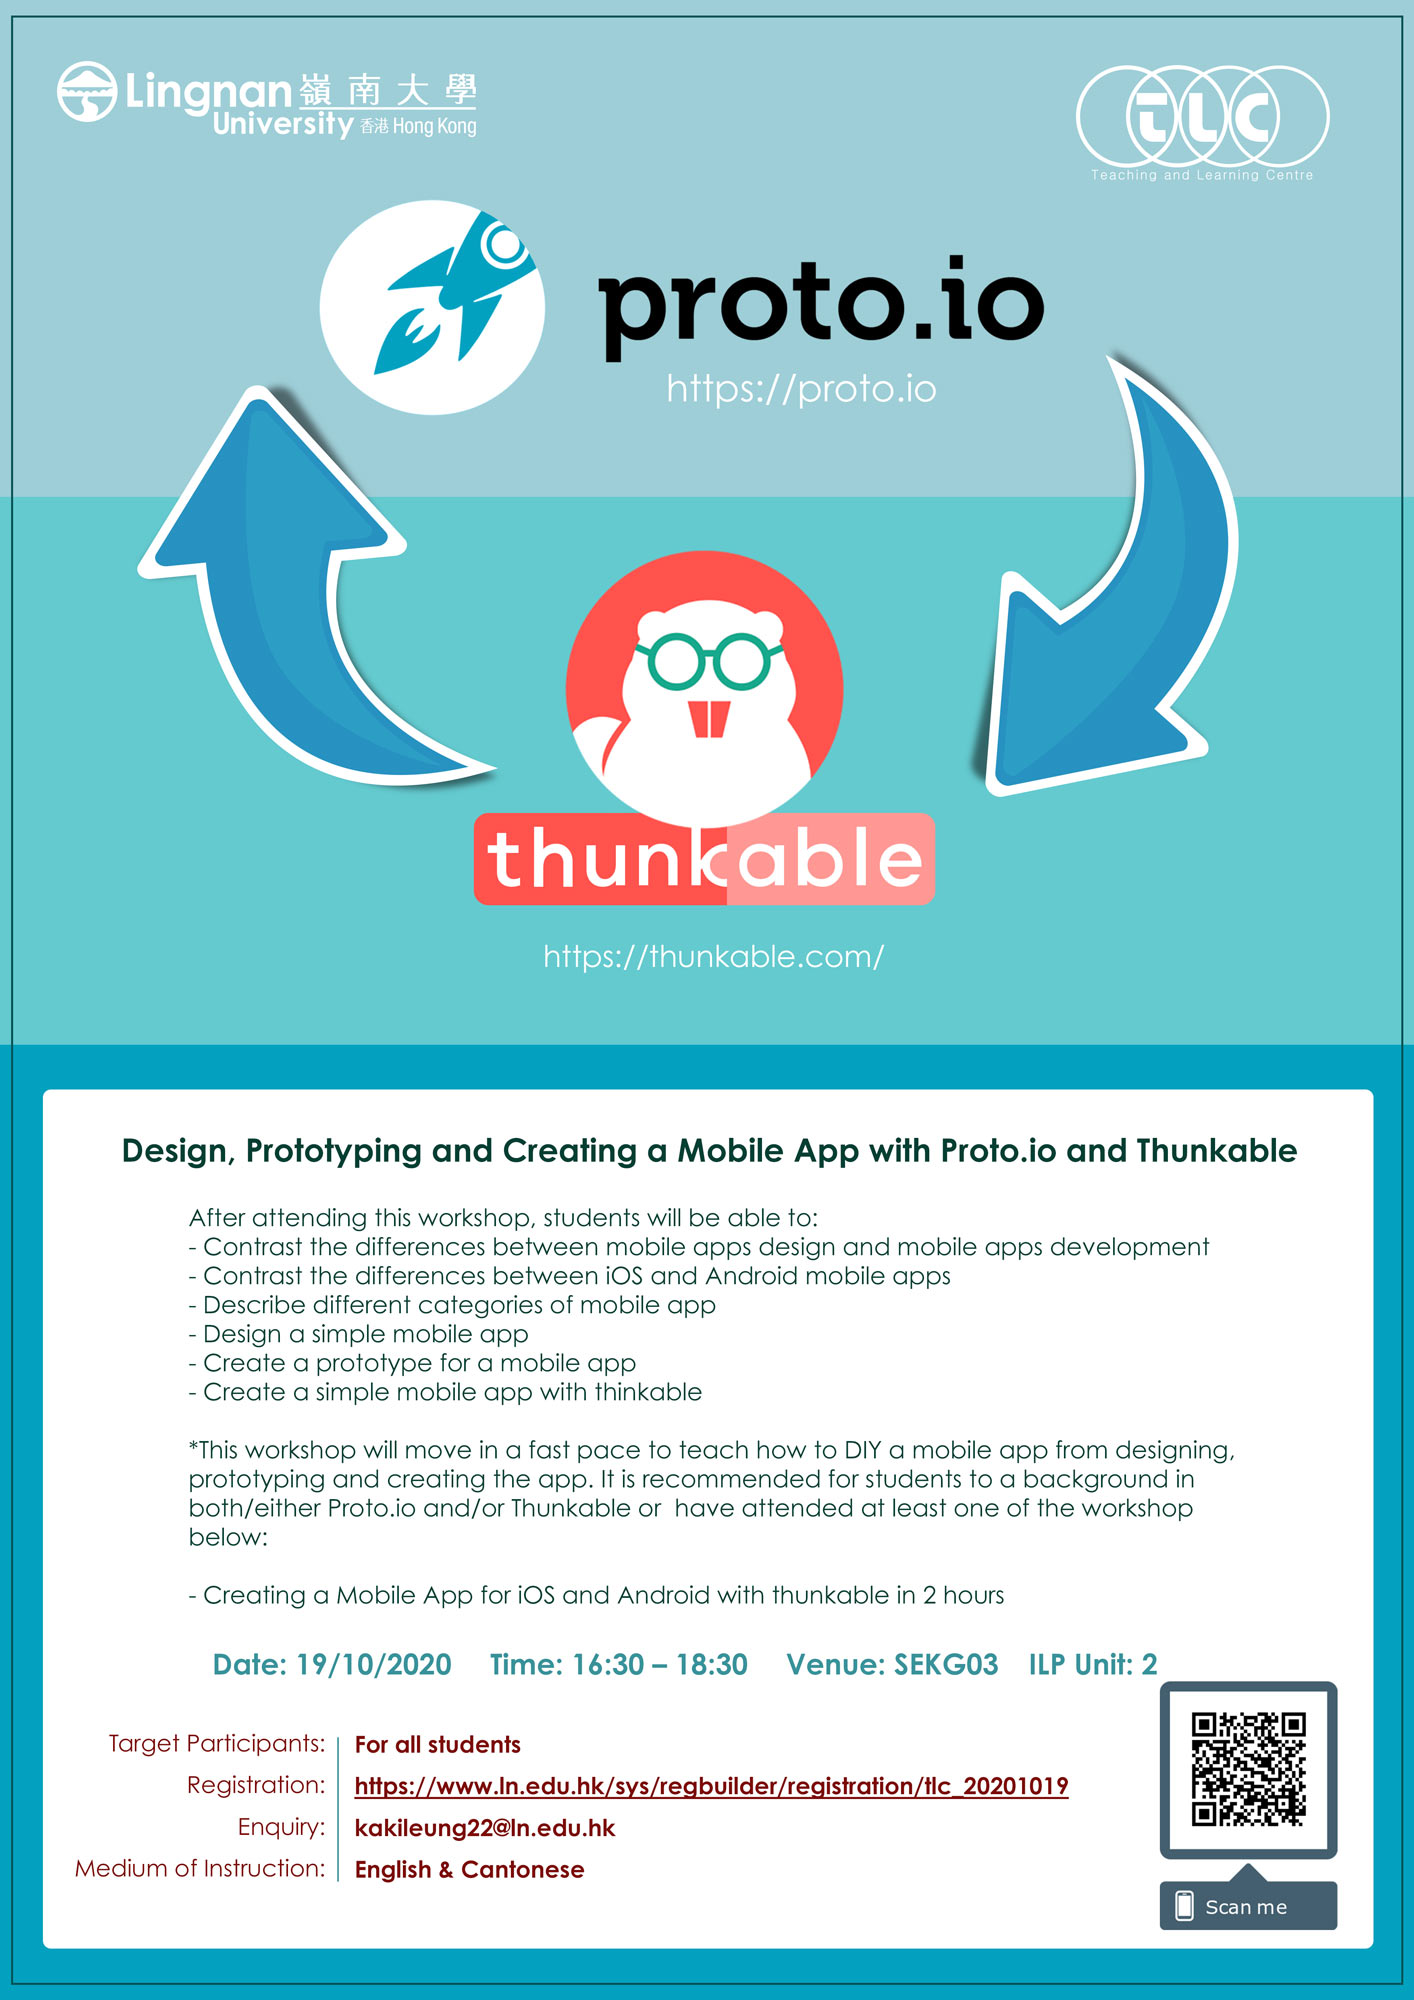 Design, Prototyping and Creating a Mobile App with Proto.io and Thunkable